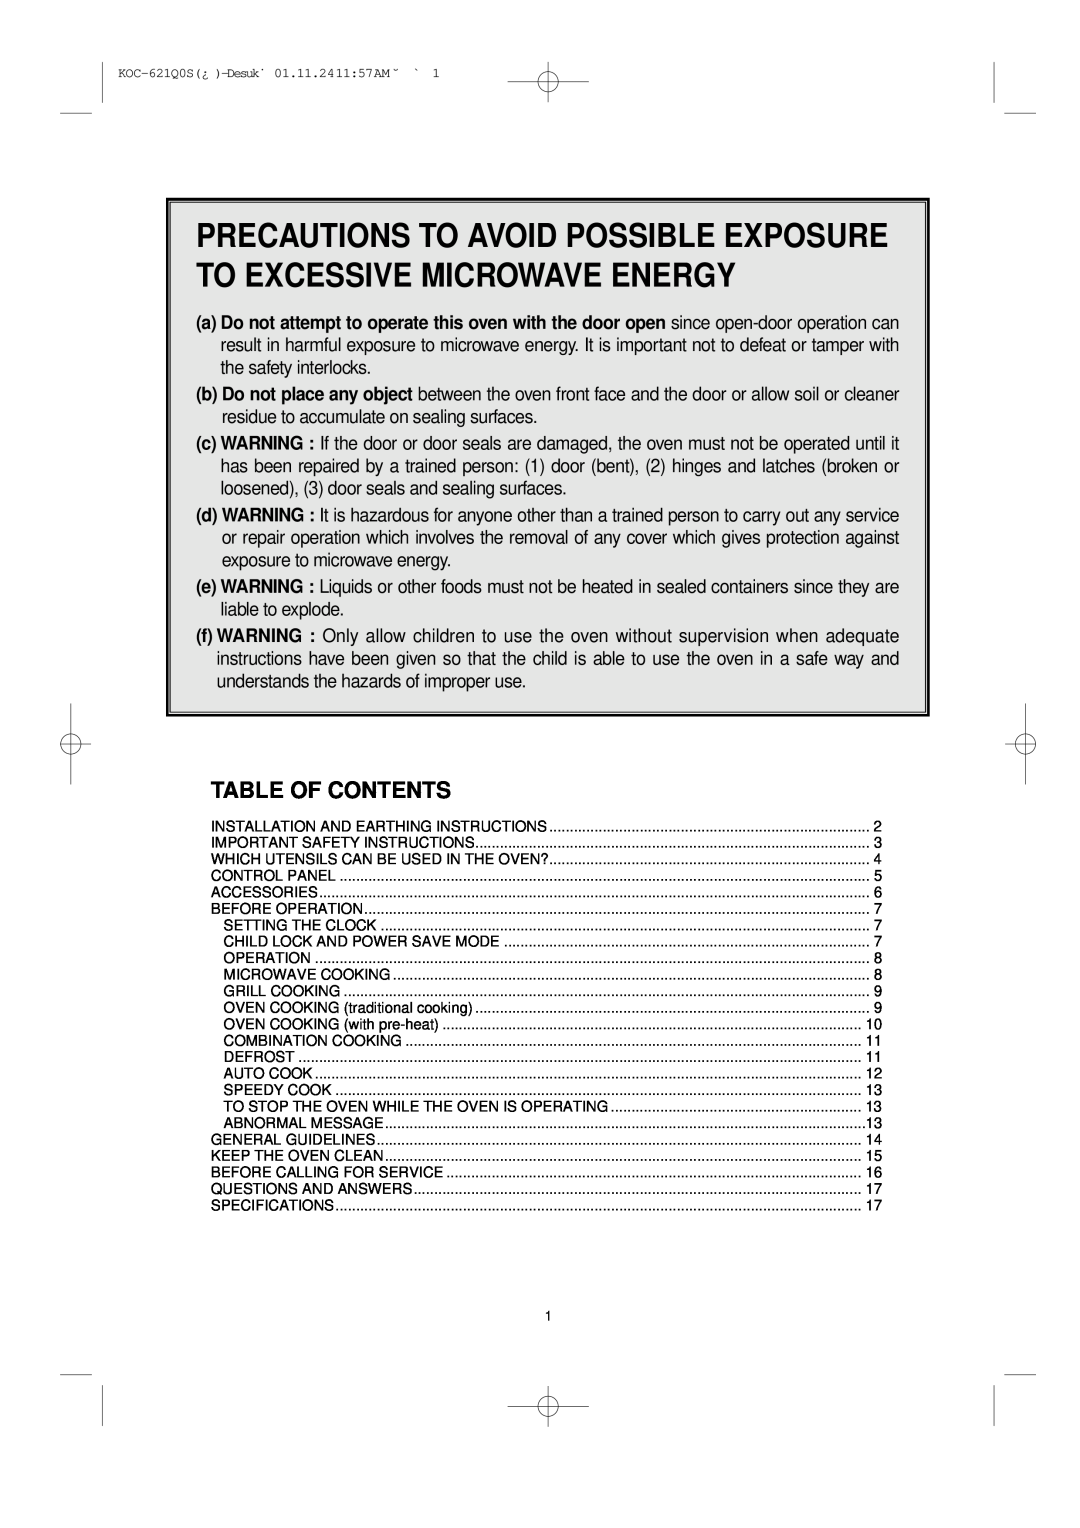 Daewoo KOC-621Q owner manual Precautions To Avoid Possible Exposure To Excessive Microwave Energy, Table Of Contents 